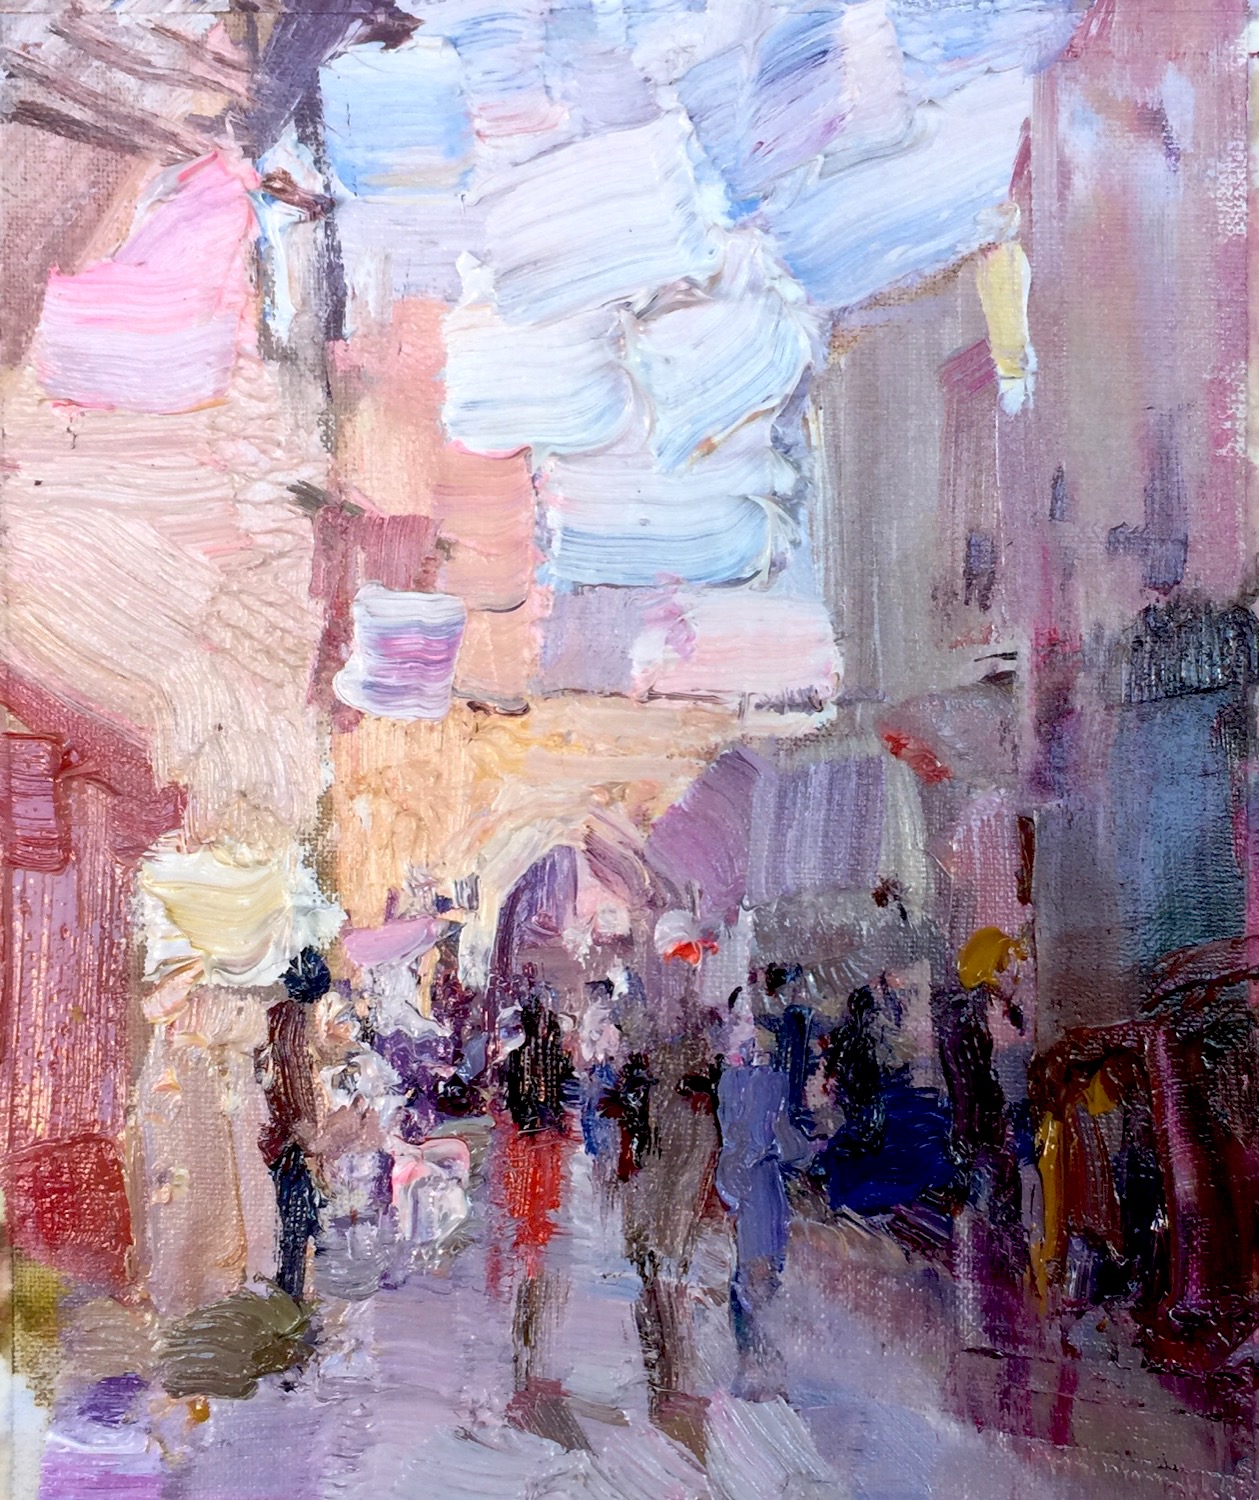 Marrakesh Alley by Barry John Raybould